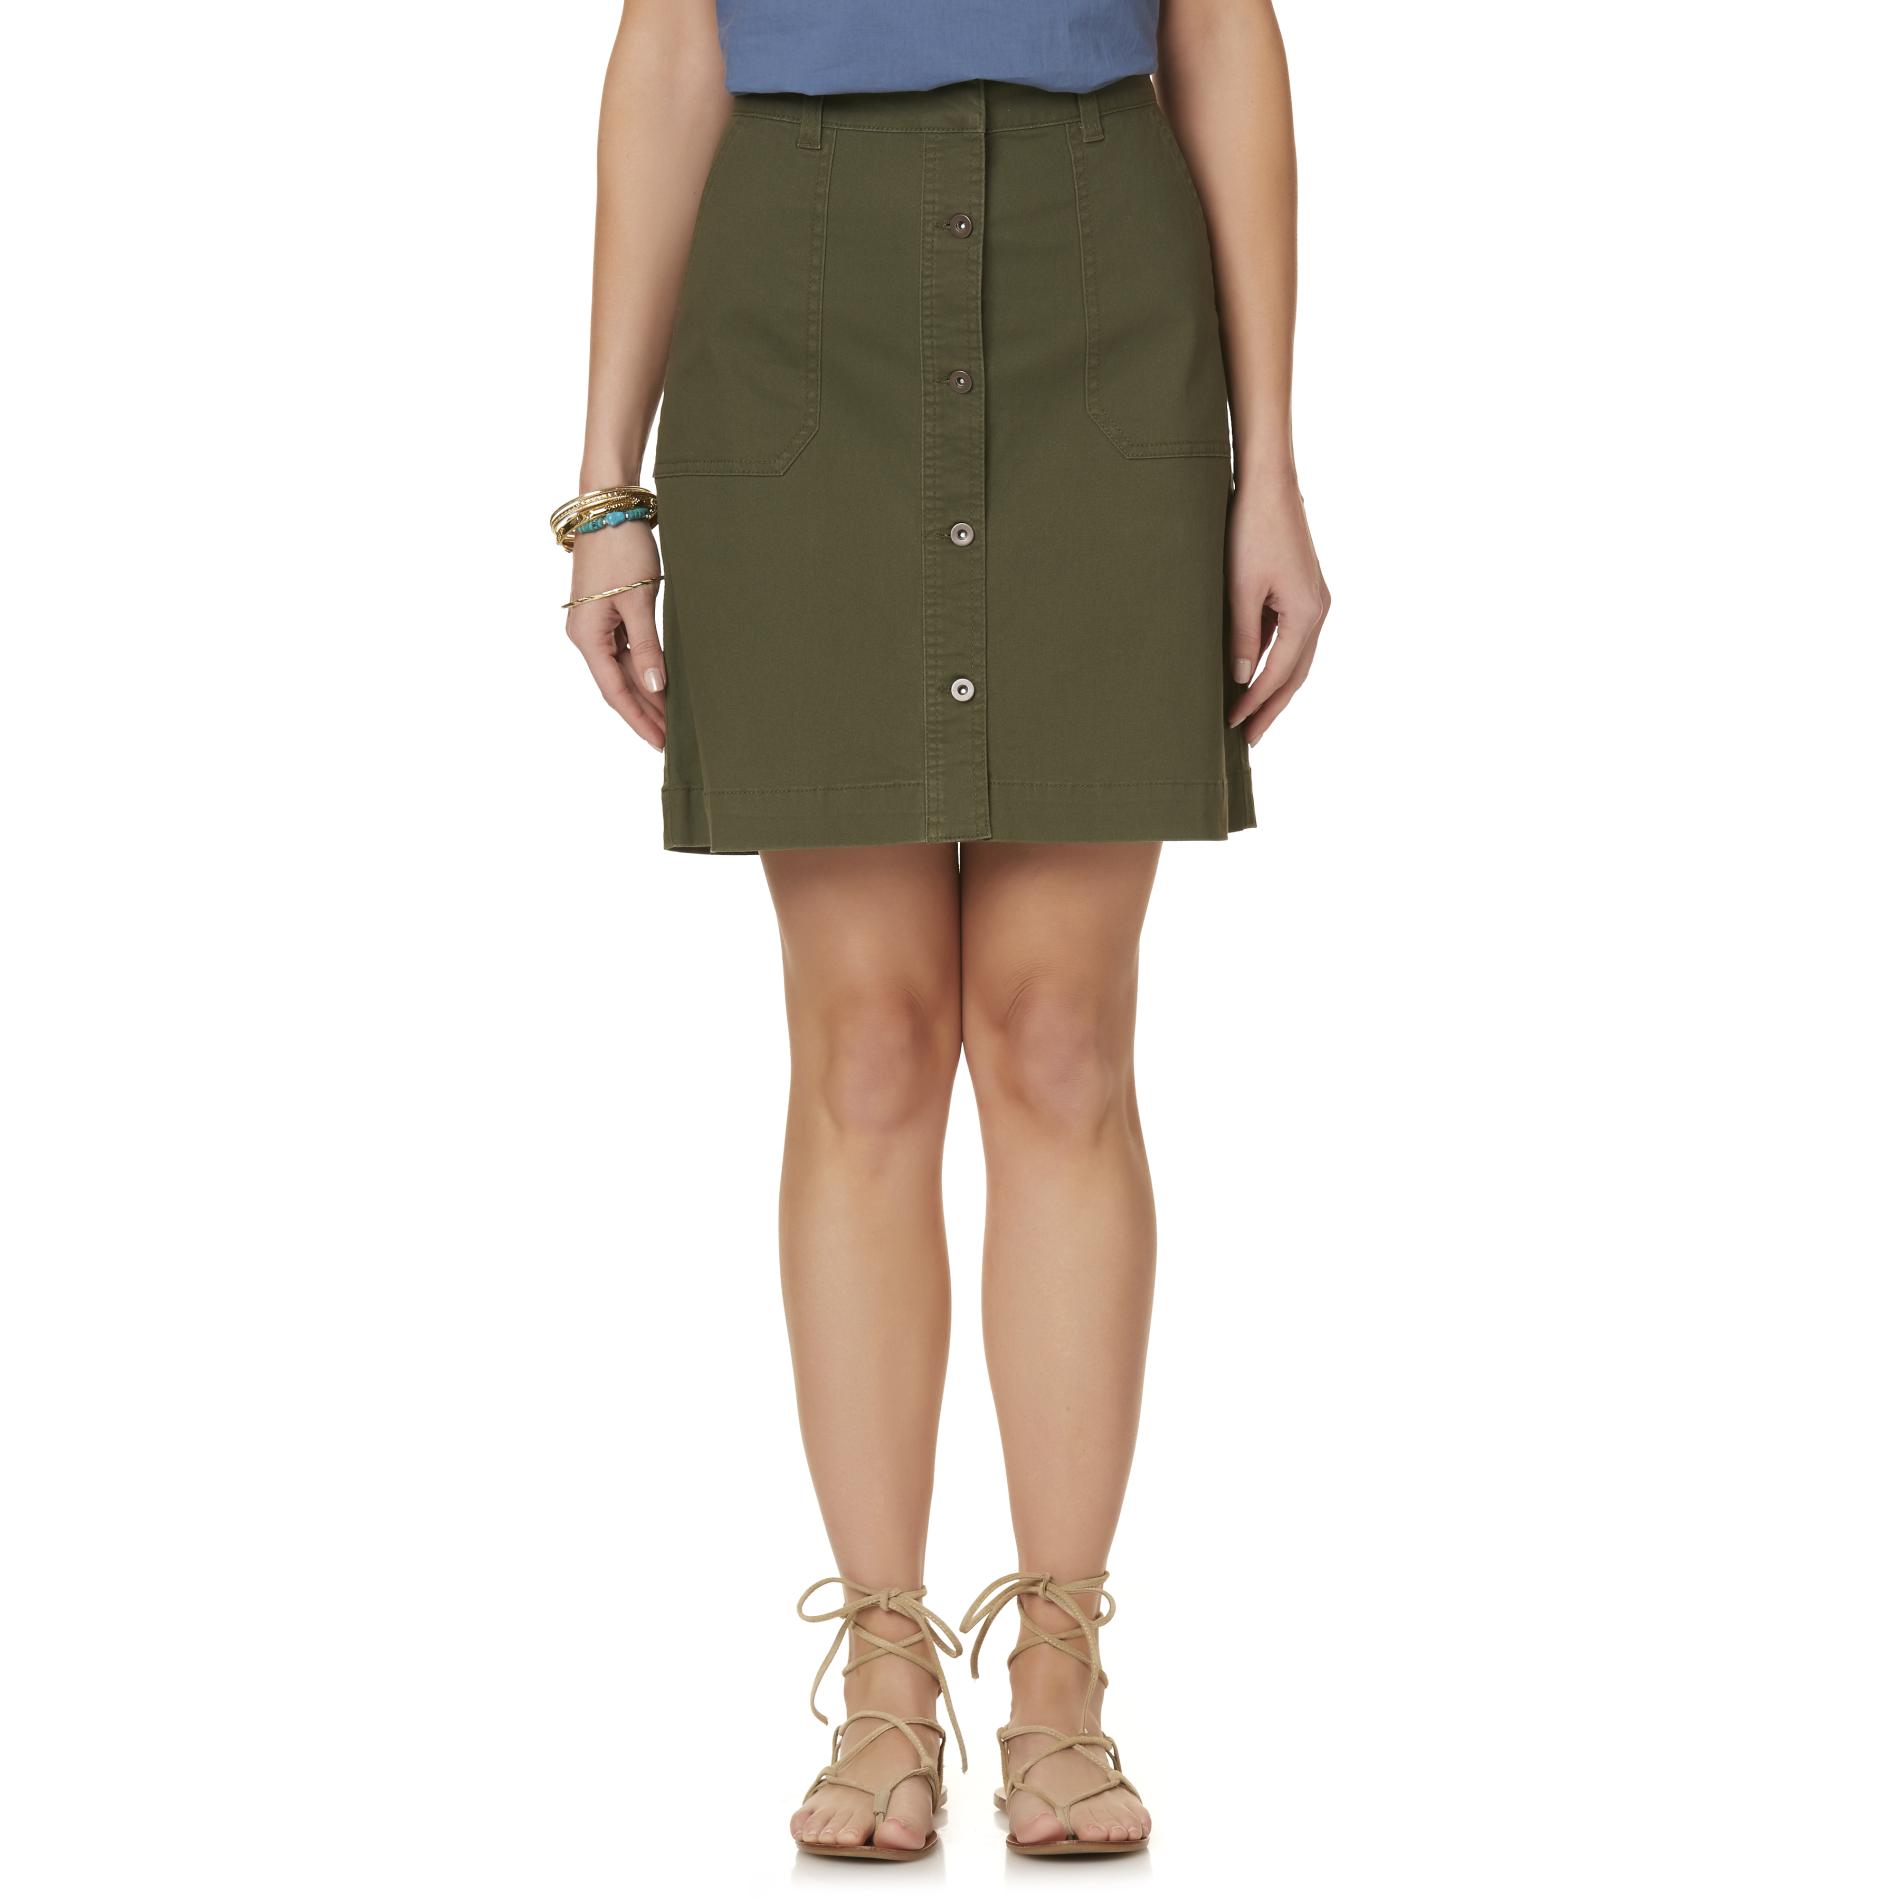 Simply Styled Women's Button-Front Skirt